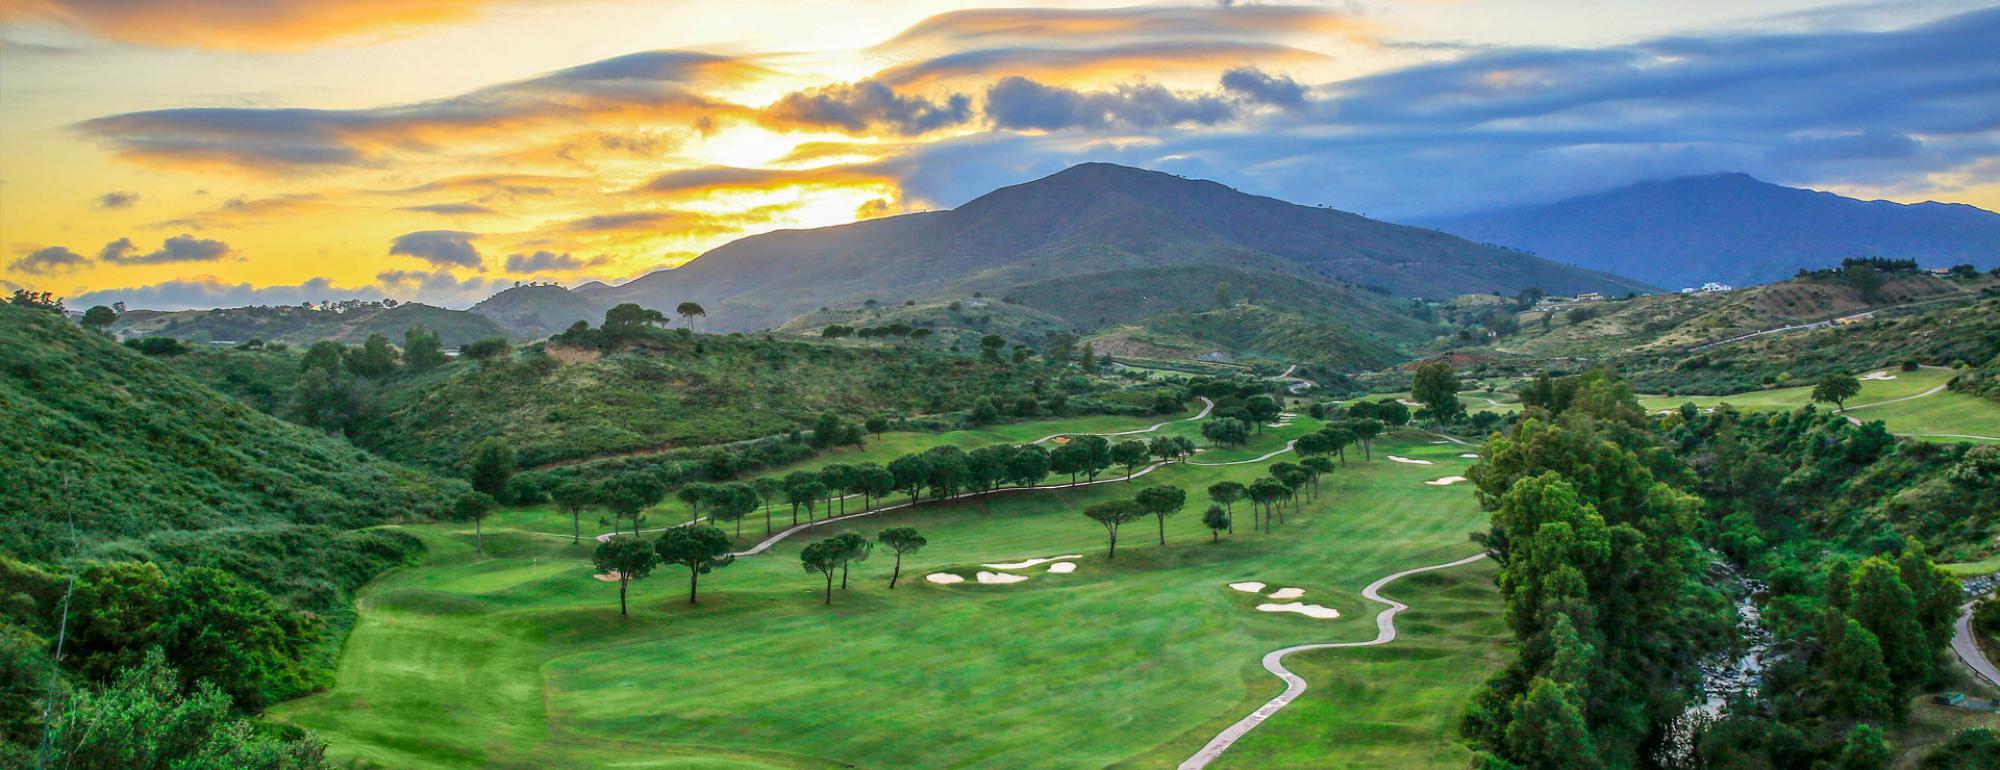 La Cala America Golf Course is among the leading golf courses on the Costa Del Sol